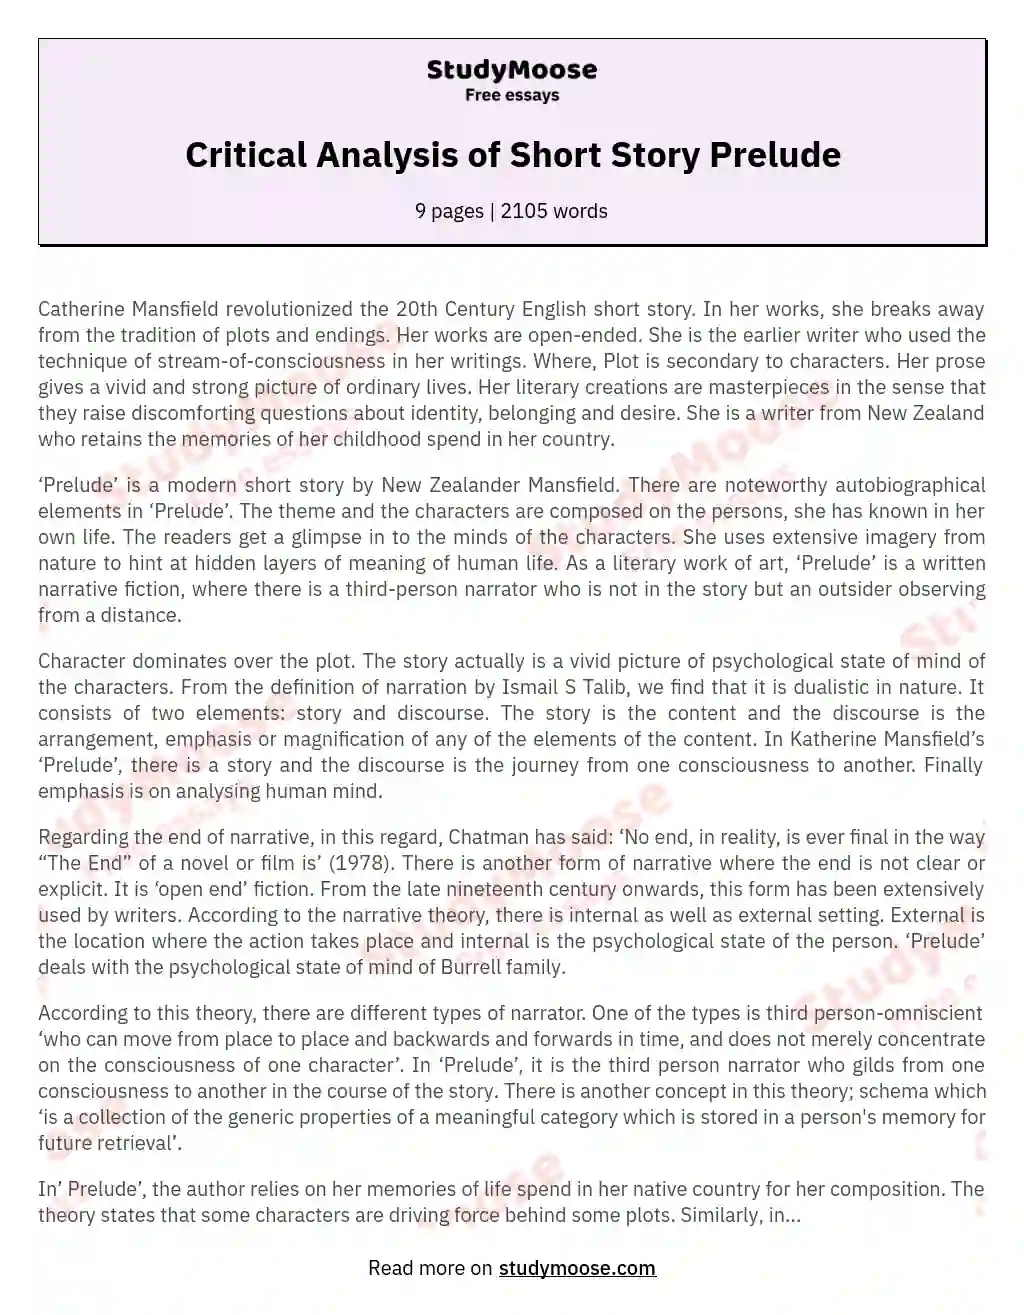 Critical Analysis of Short Story Prelude